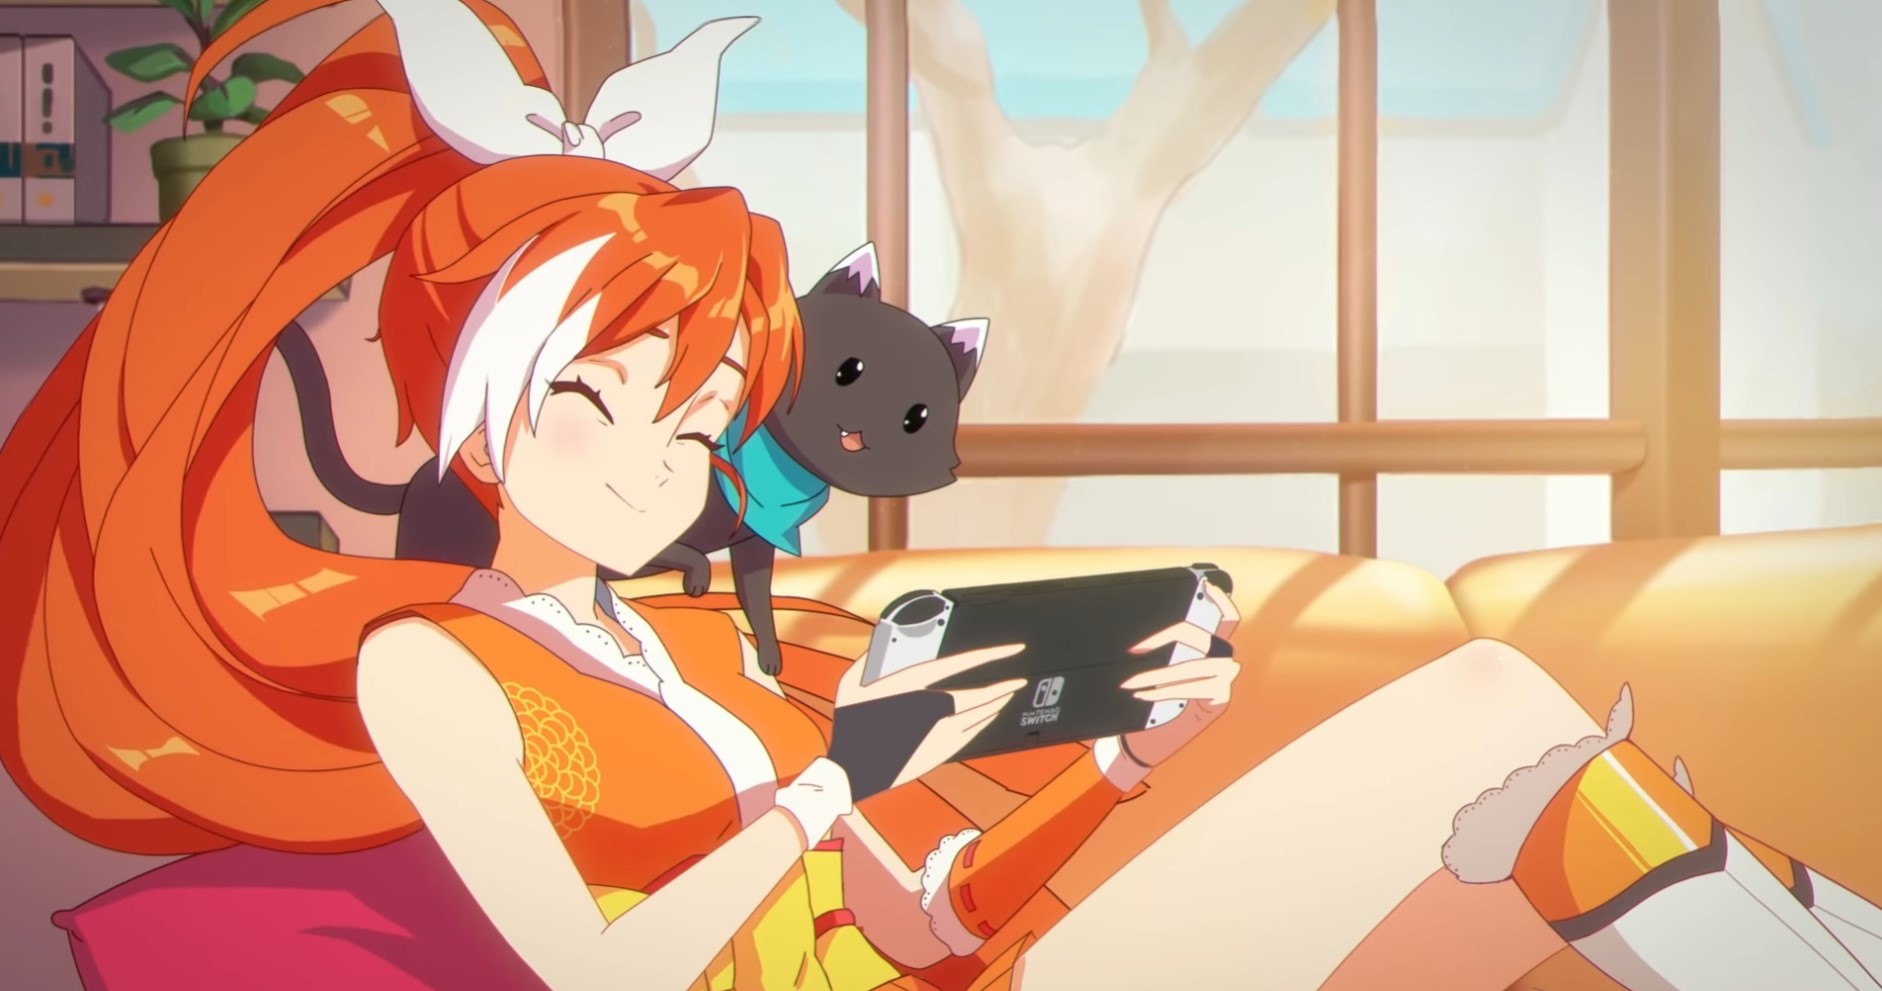 Crunchyroll Is Now Available on the Nintendo Switch